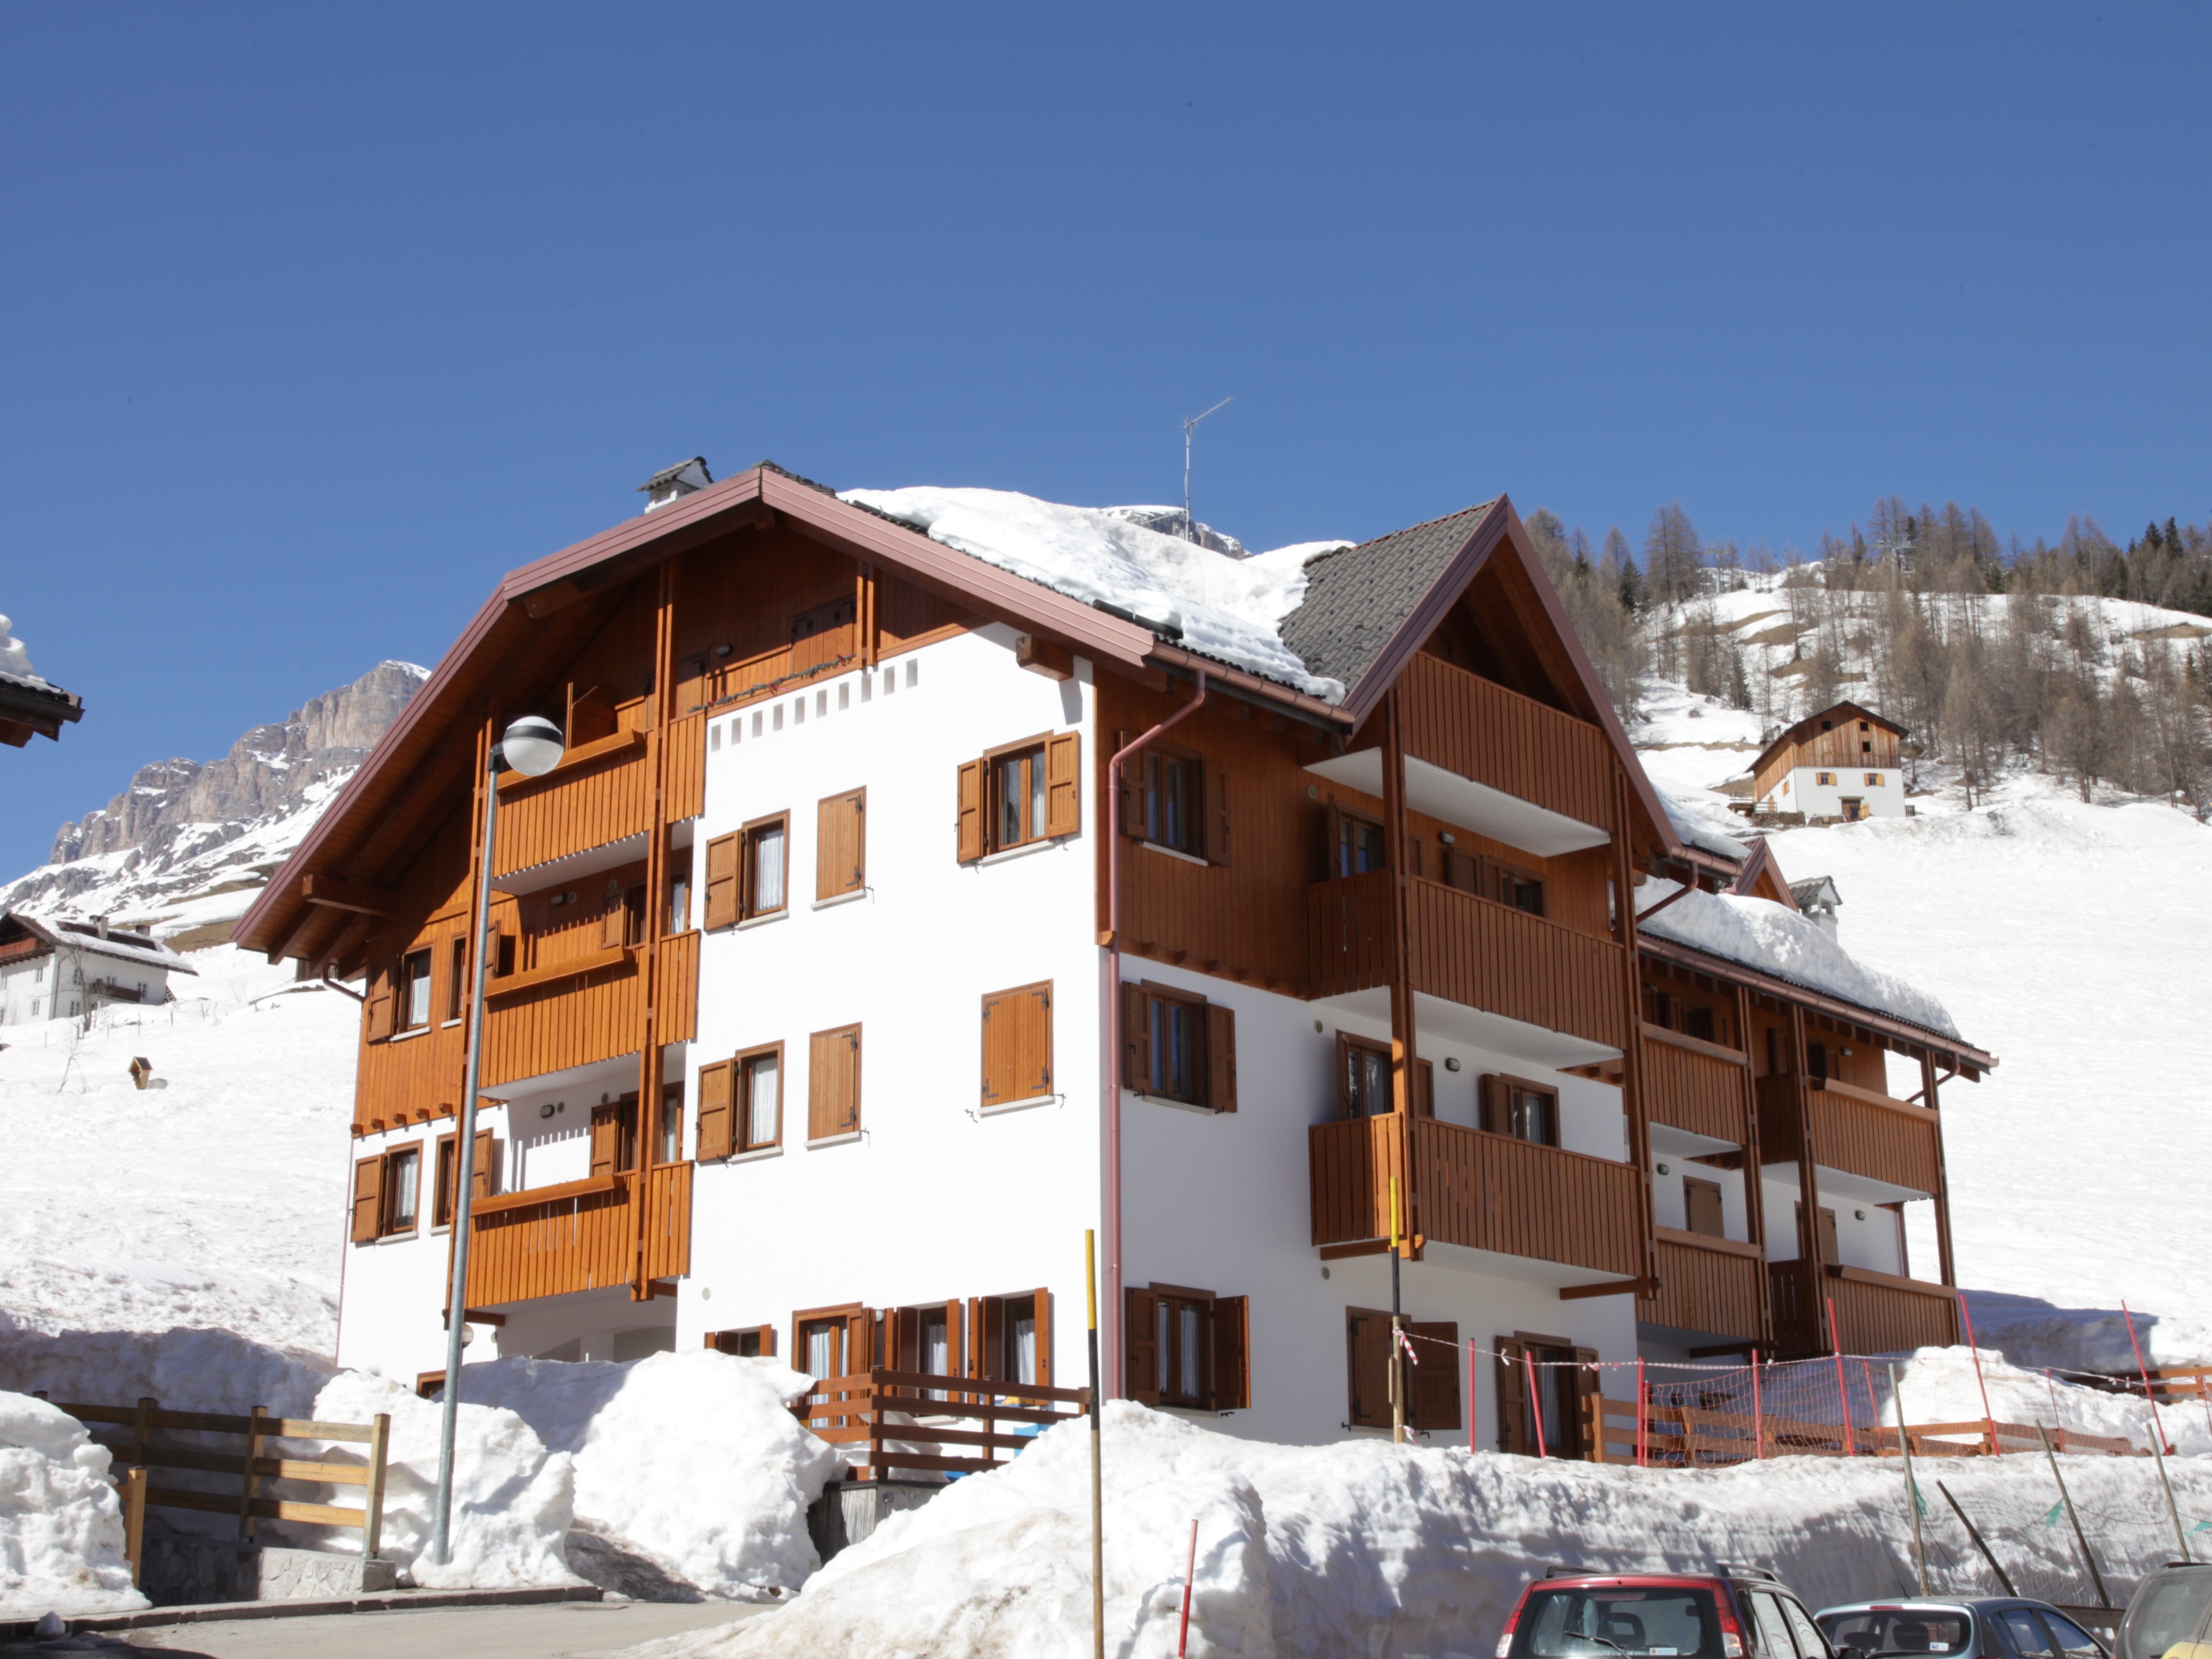 Chalet-appartement Residence Alpenrose incl. halfpension - 2-4 personen